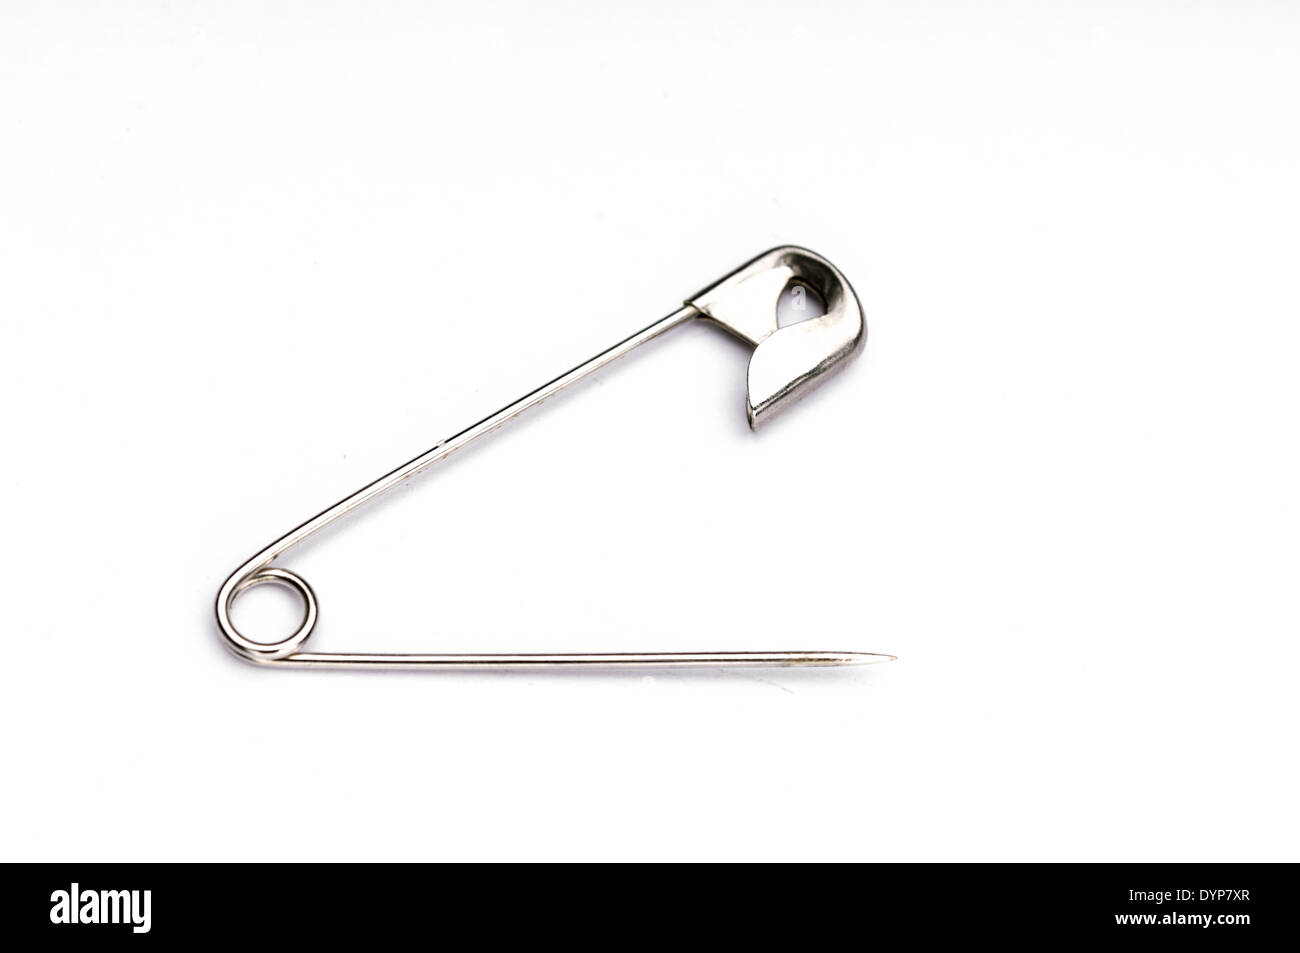 open safety pin